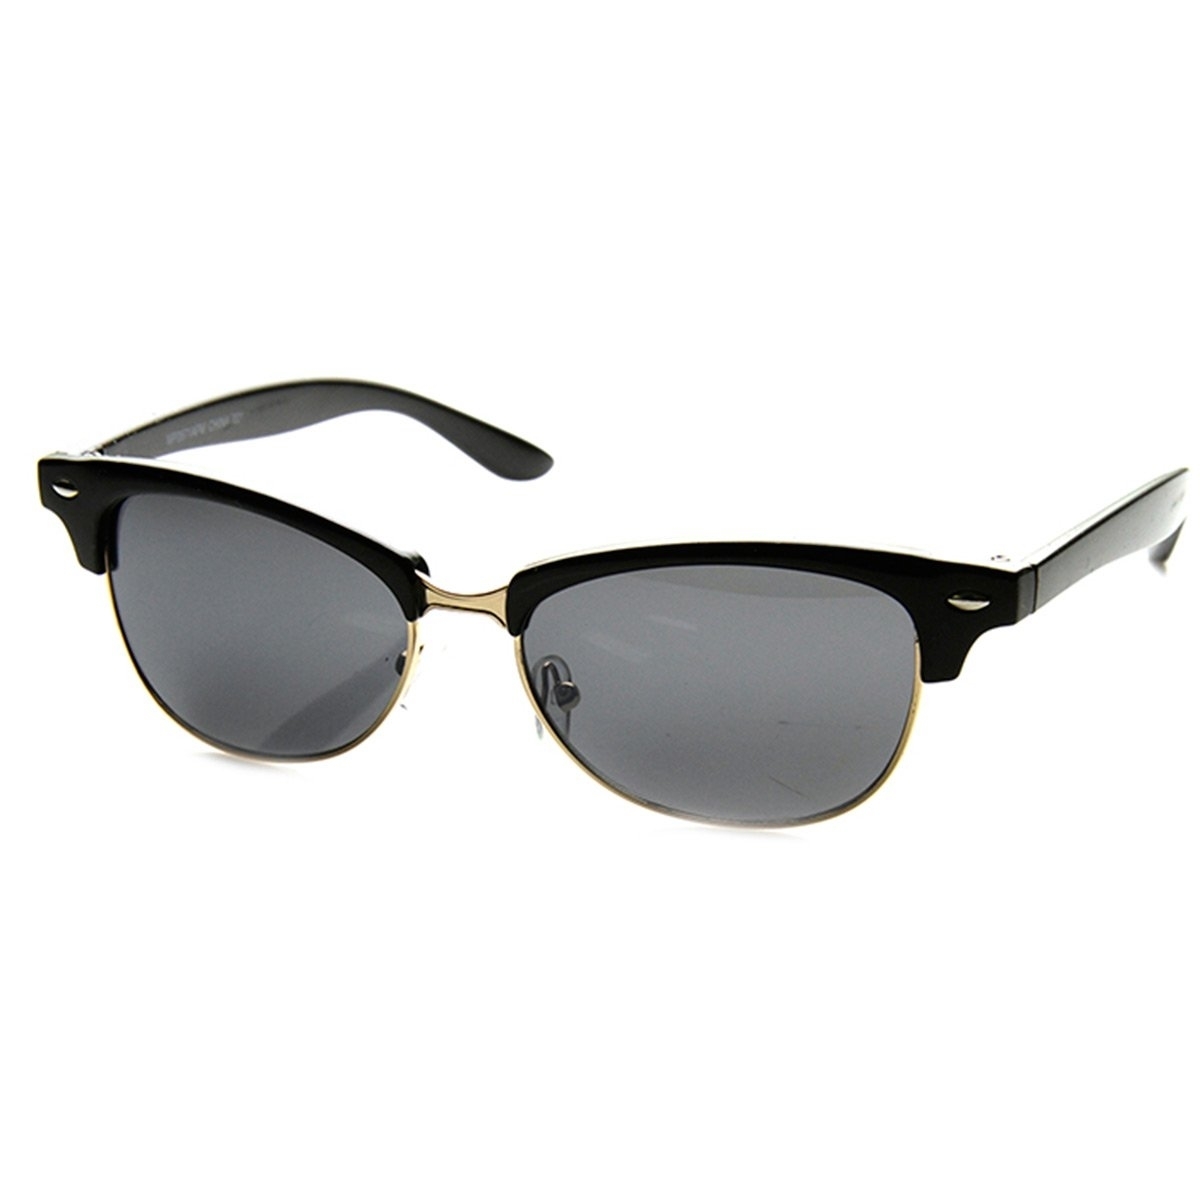 Classic Oval Shaped Semi-Rimless Half Frame Horn Rimmed Sunglasses - Black-Silver Brown